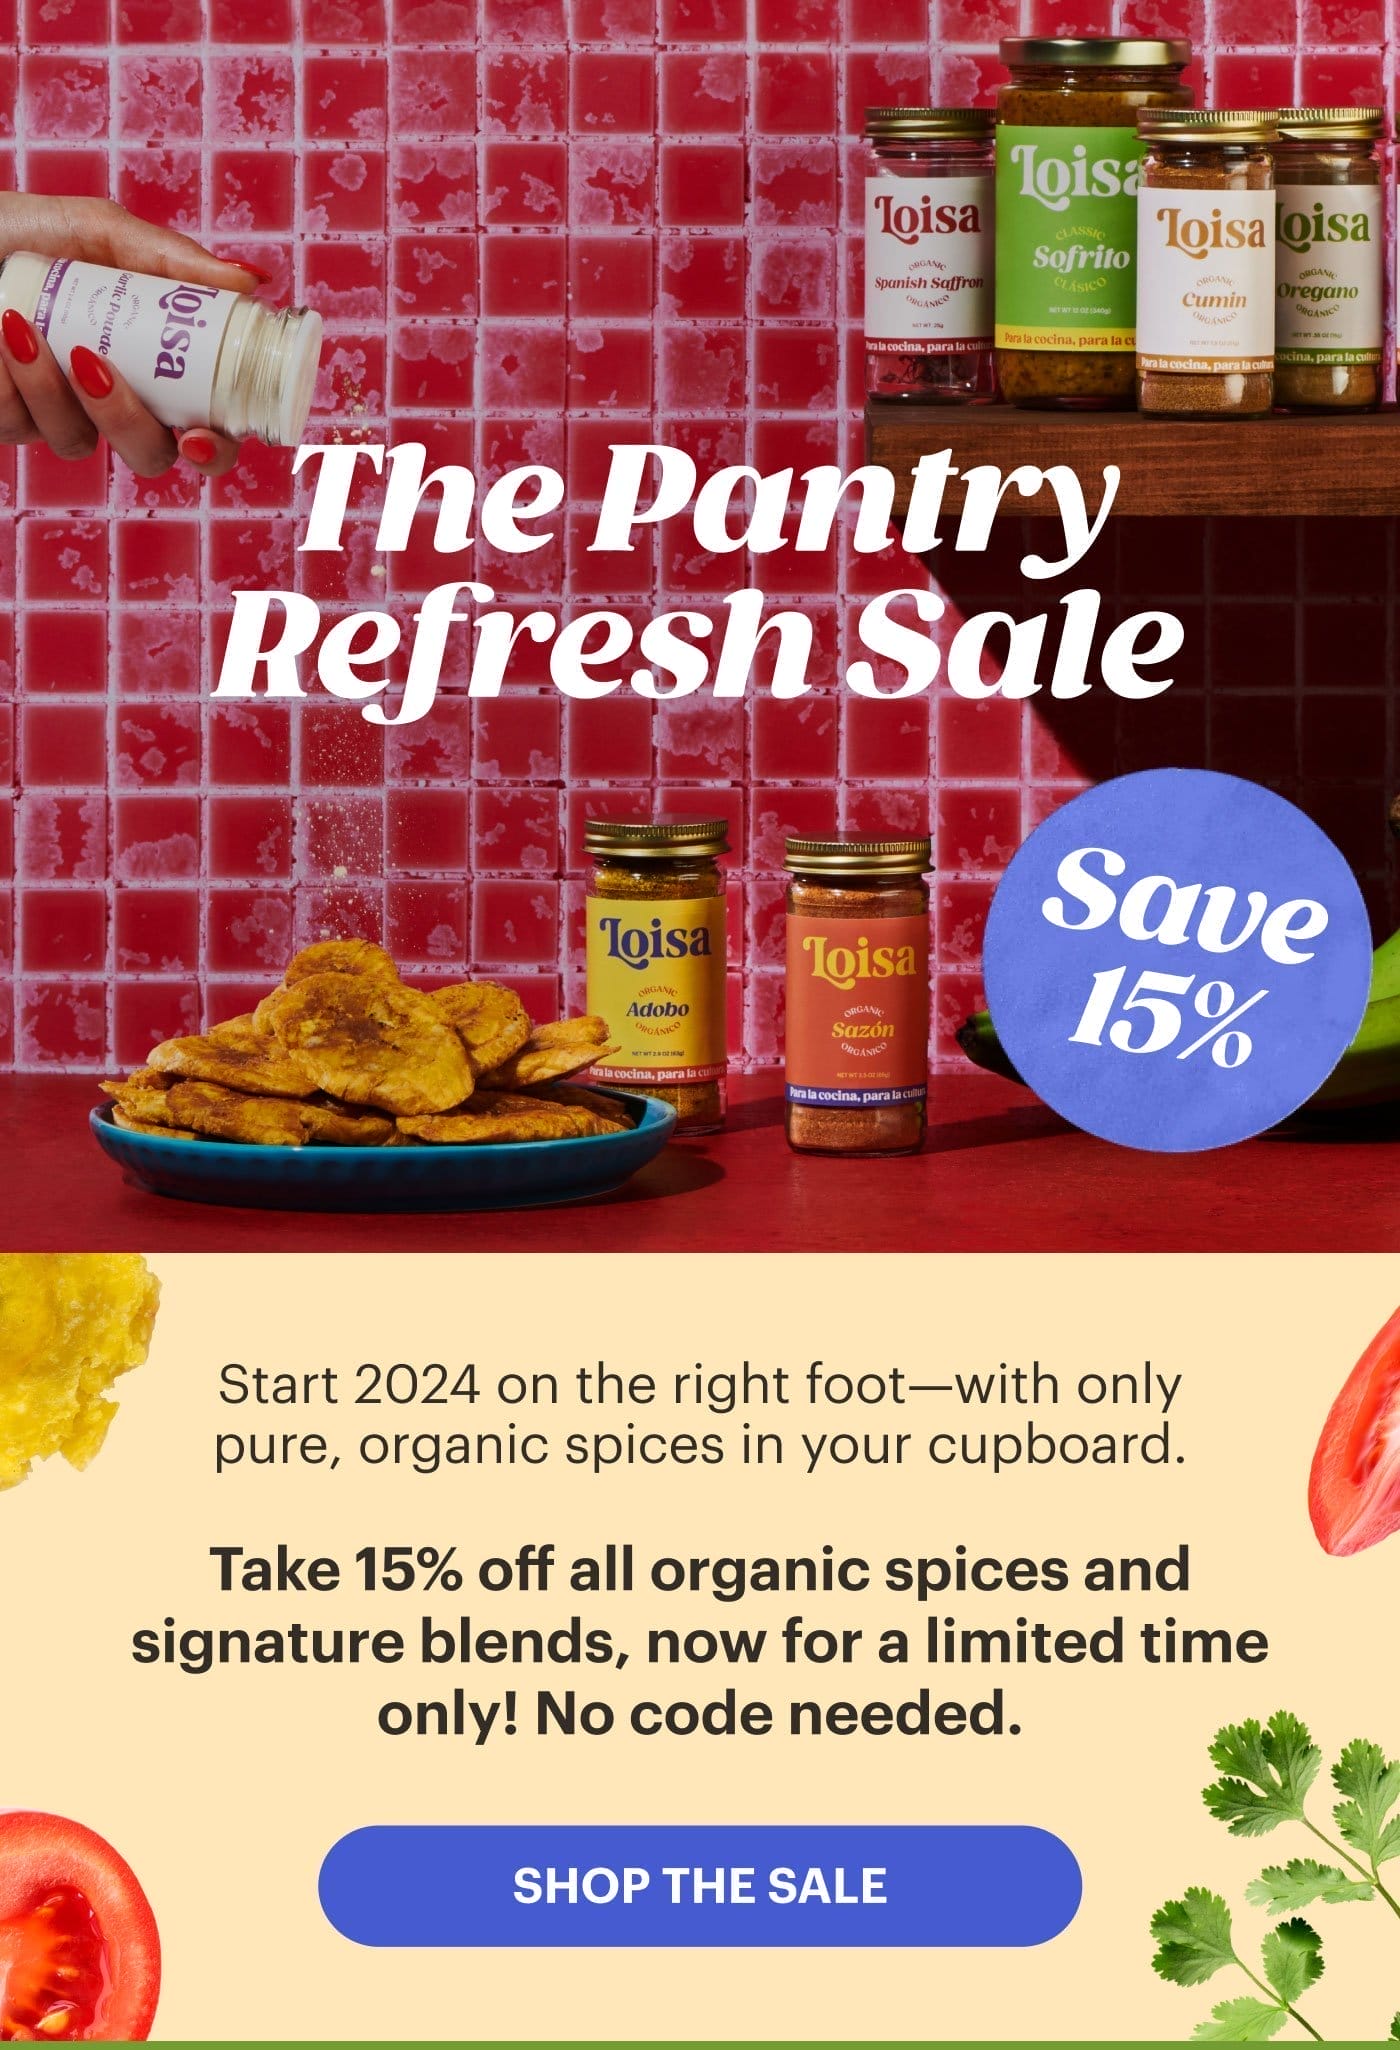 The Pantry Refresh Sale SHOP THE SALE